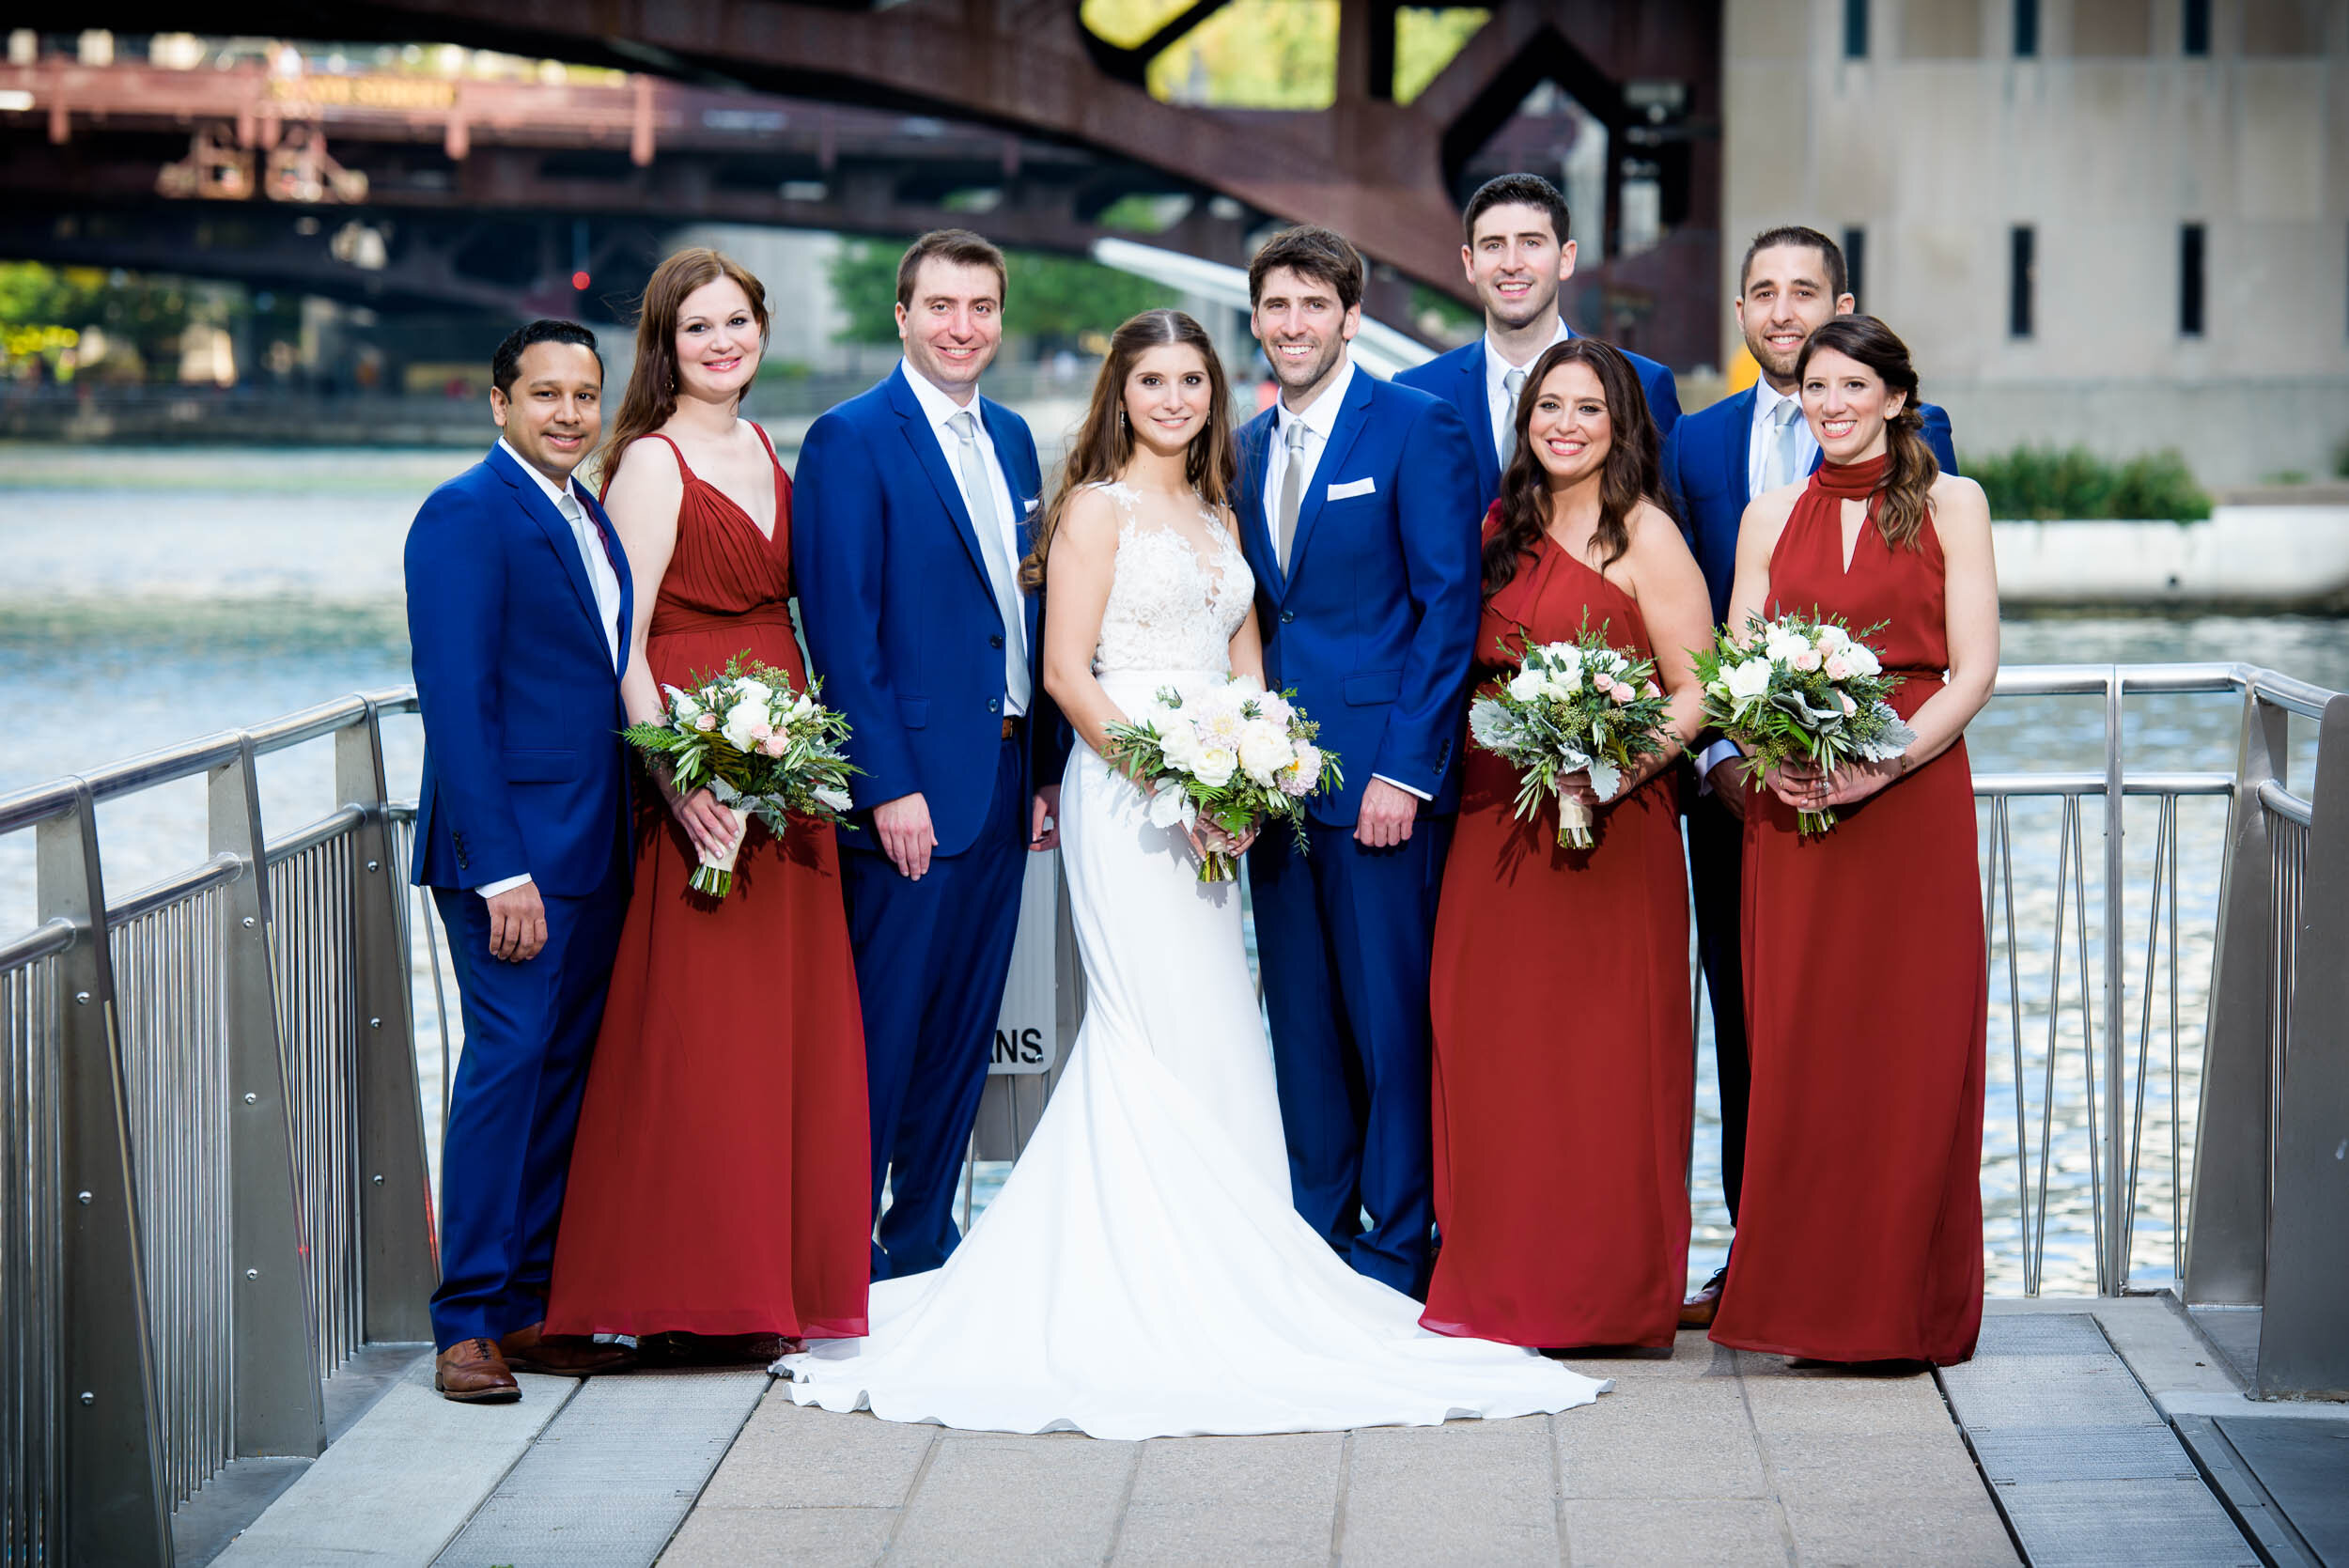 Wedding party portrait on the Chicago Riverwalk: Ravenswood Event Center Chicago wedding captured by J. Brown Photography.  